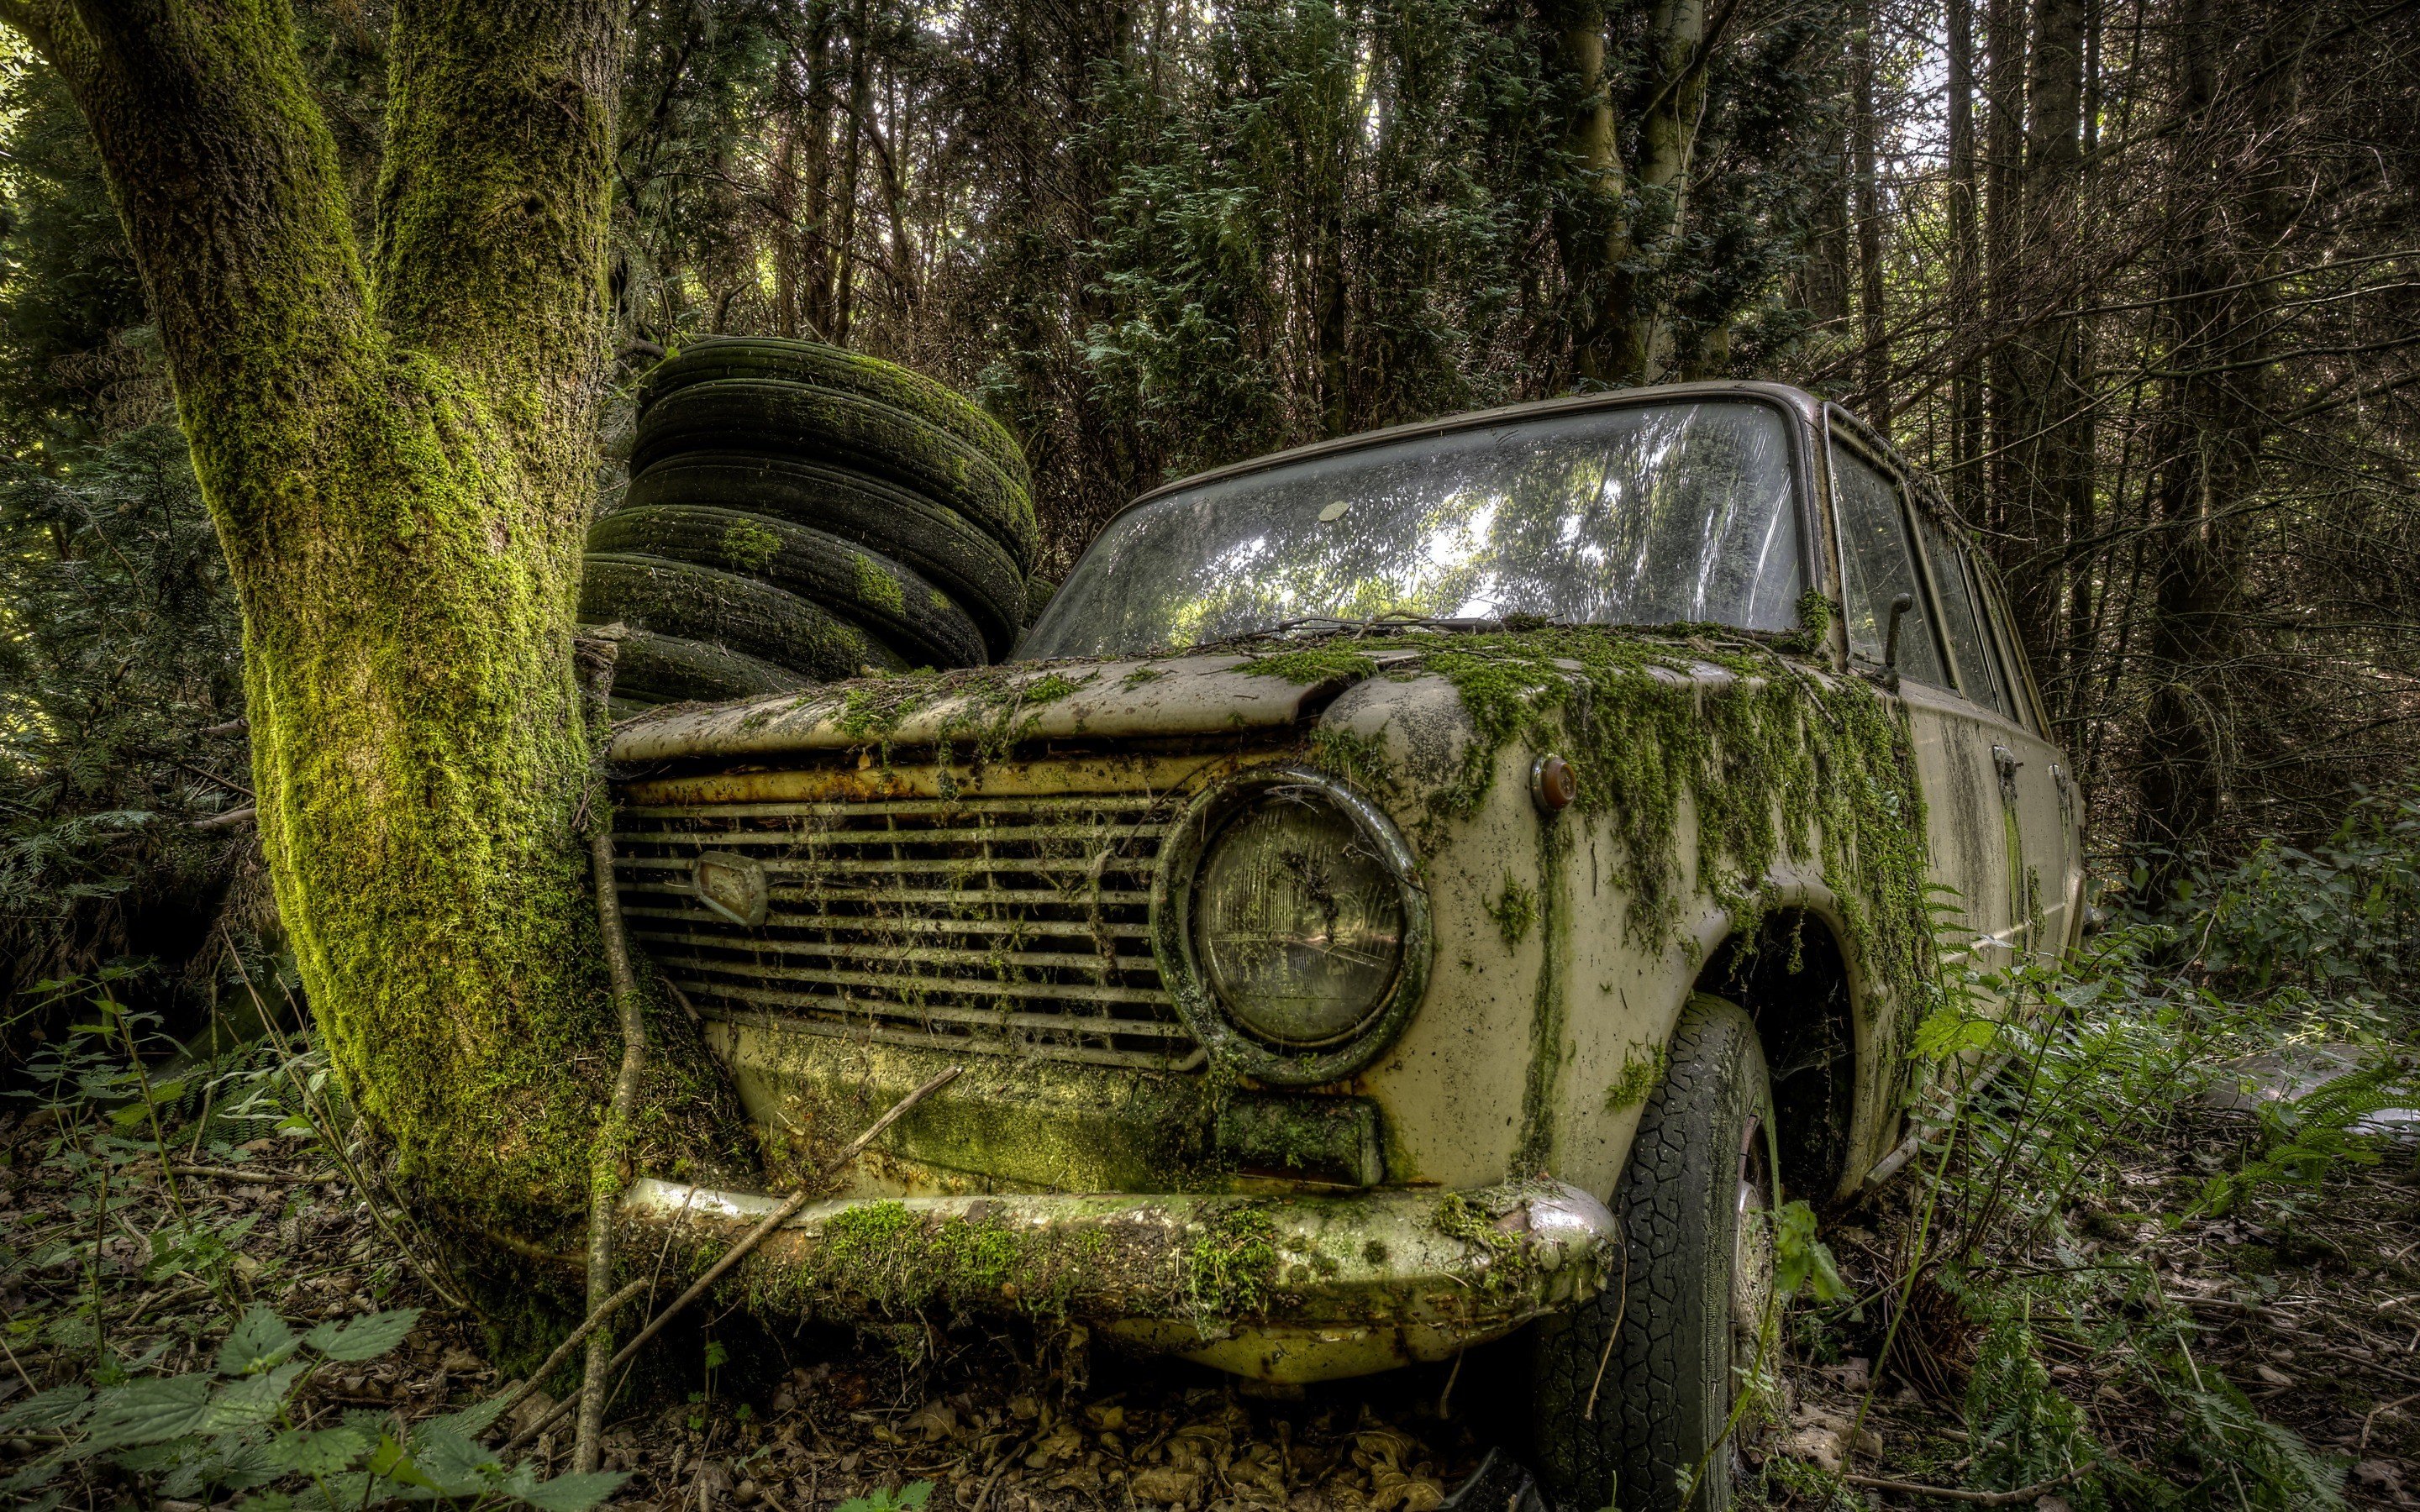 Wallpaper, trees, forest, leaves, nature, abandoned, branch, moss, LADA, wreck, rust, HDR, old car, Russian cars, Vintage car, tyres, Sedan, woodland, land vehicle, automobile make, sport utility vehicle, off roading, off